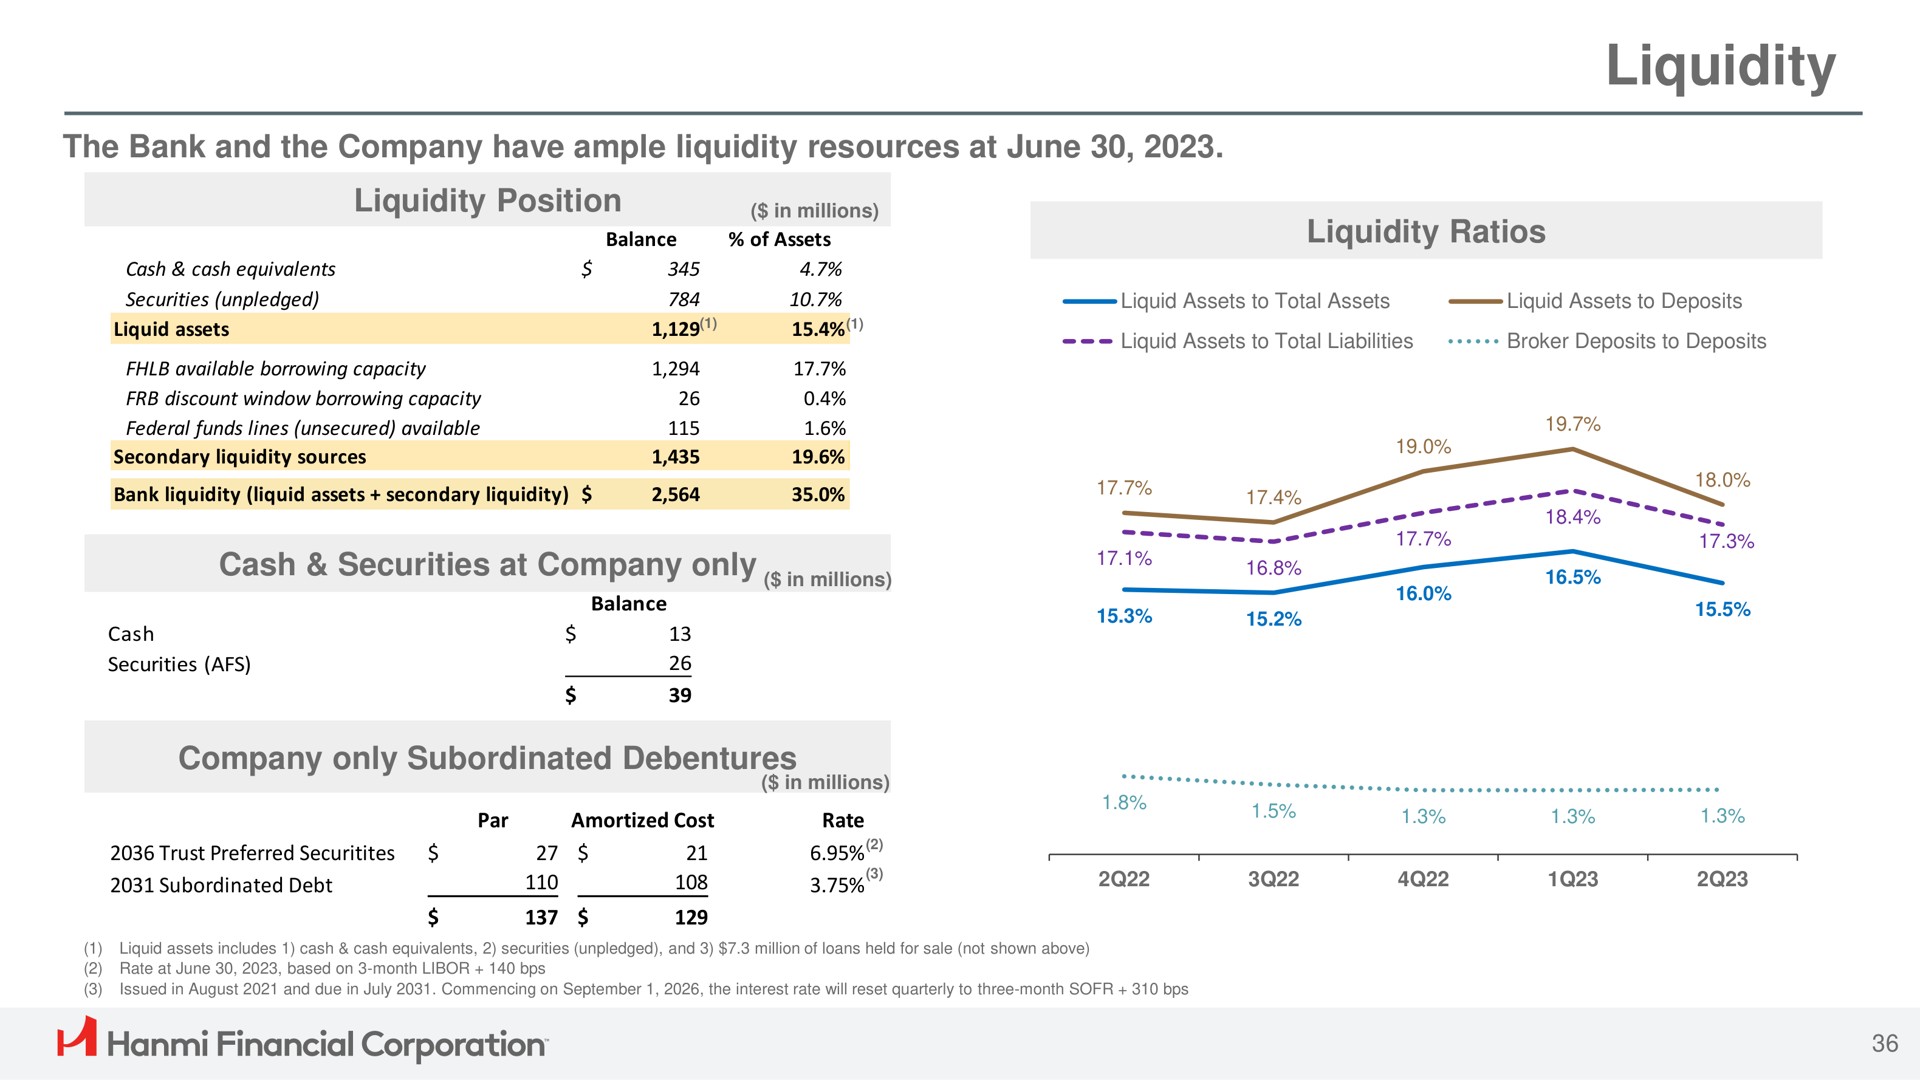 liquidity cash securities at company only a financial corporation | Hanmi Financial